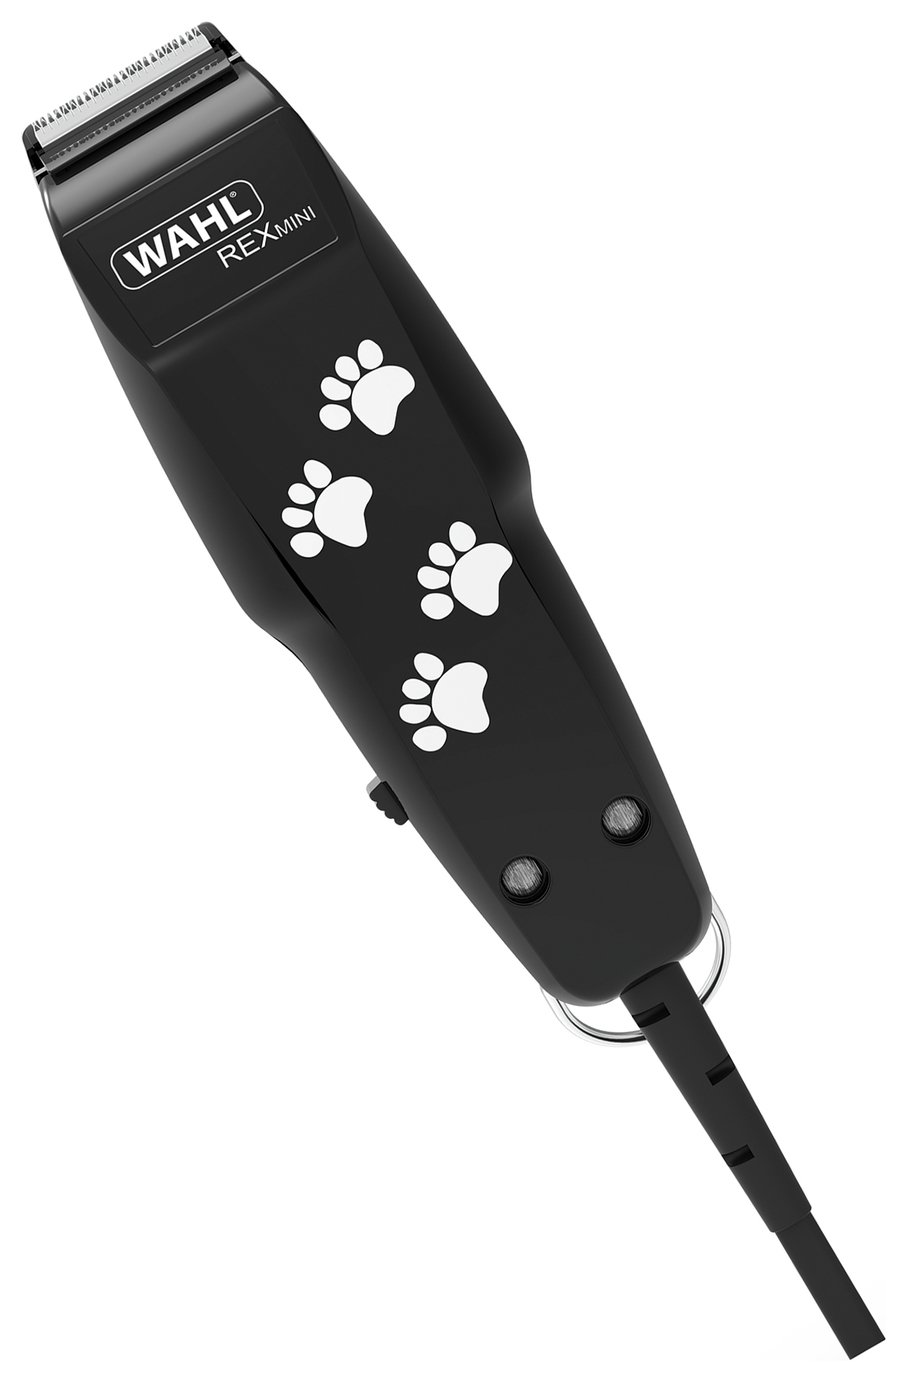 Wahl Mains Powered Rex Mini Trimmer